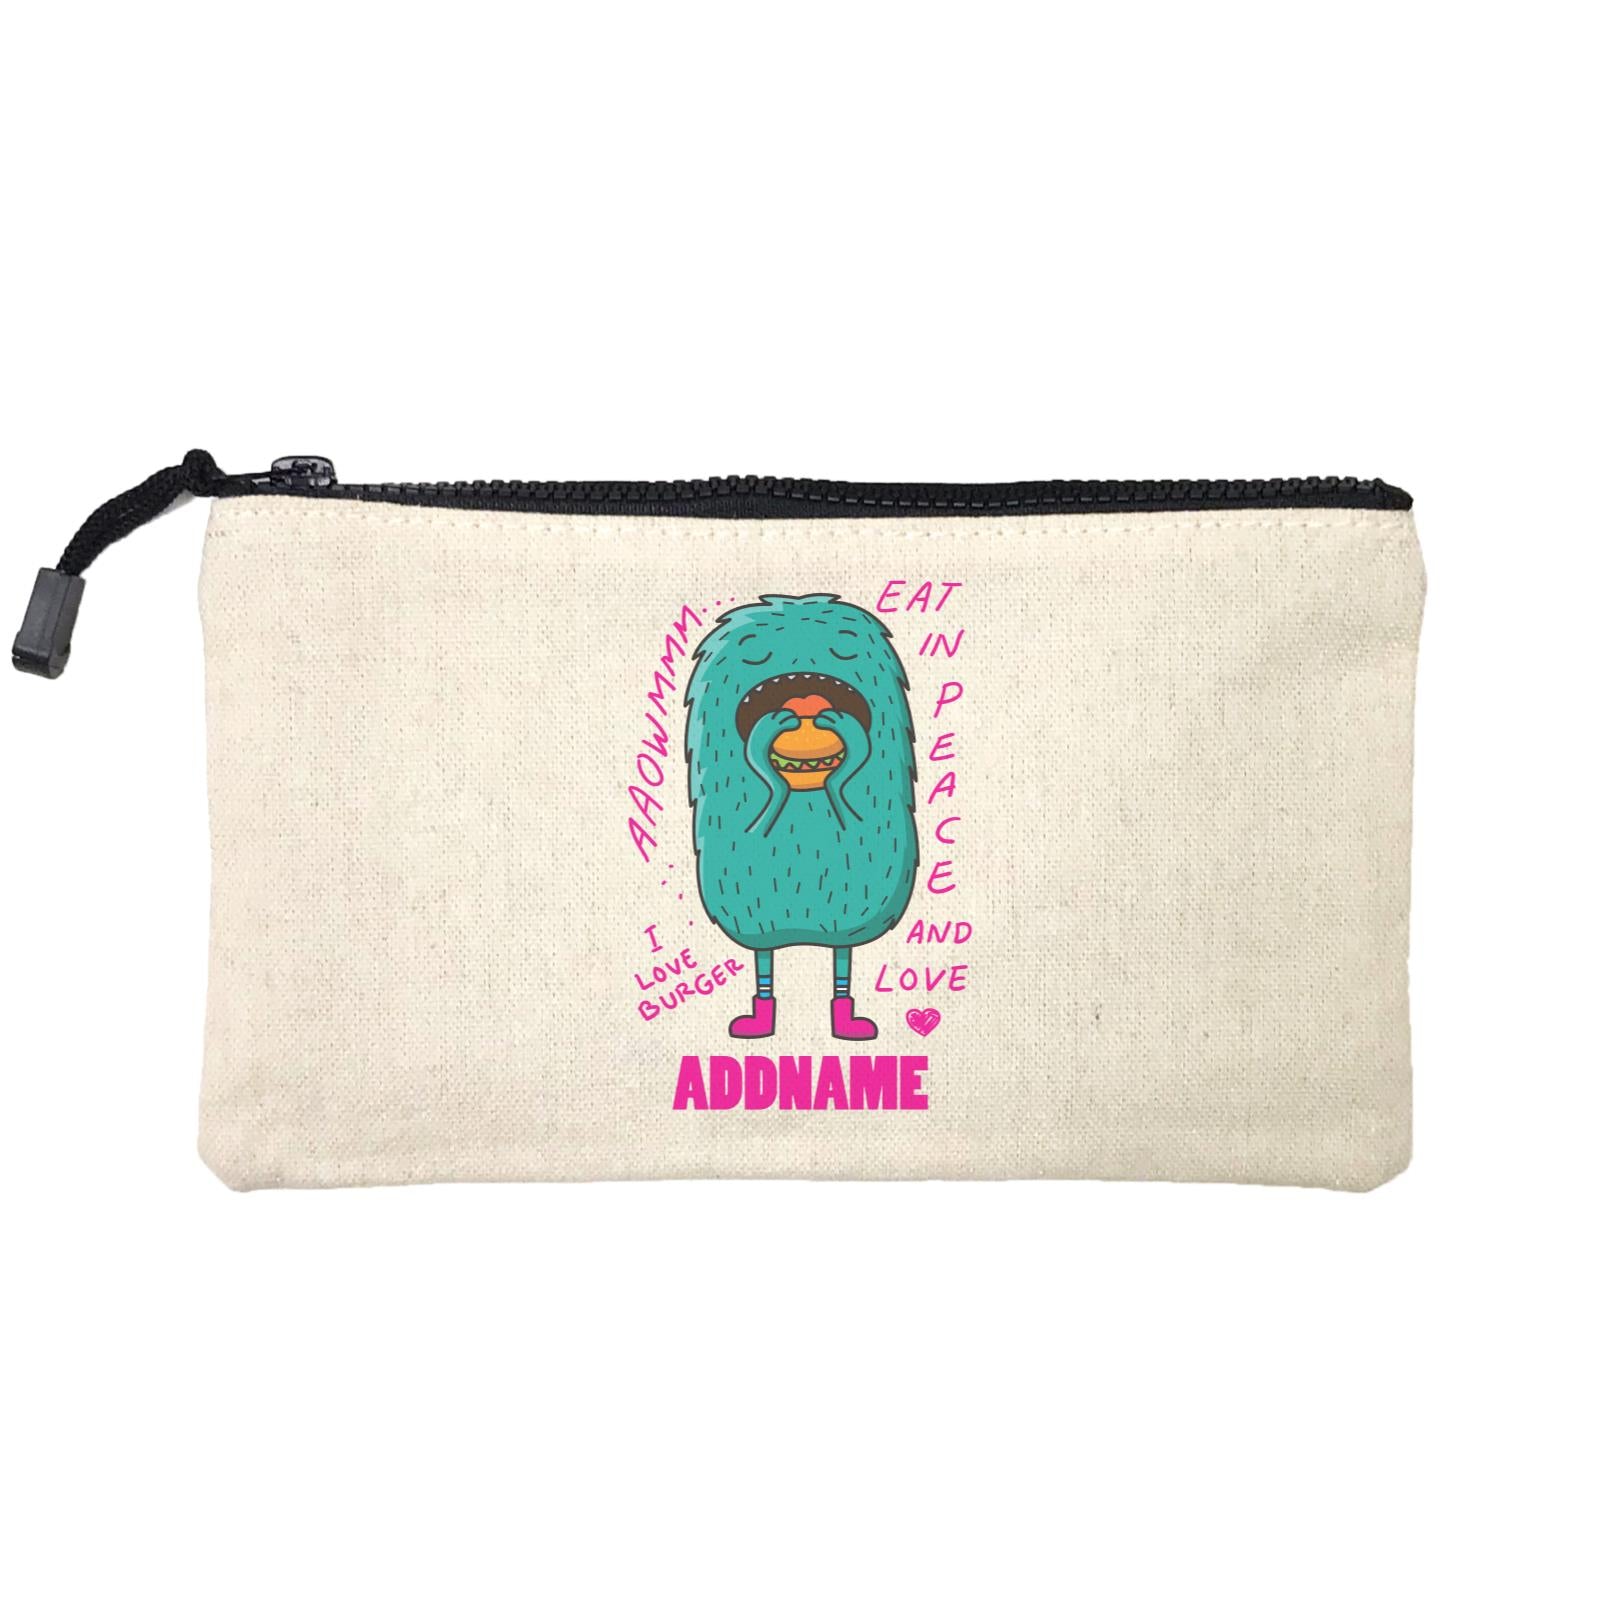 Cool Cute Monster Eat In Peace And Love Addname Mini Accessories Stationery Pouch